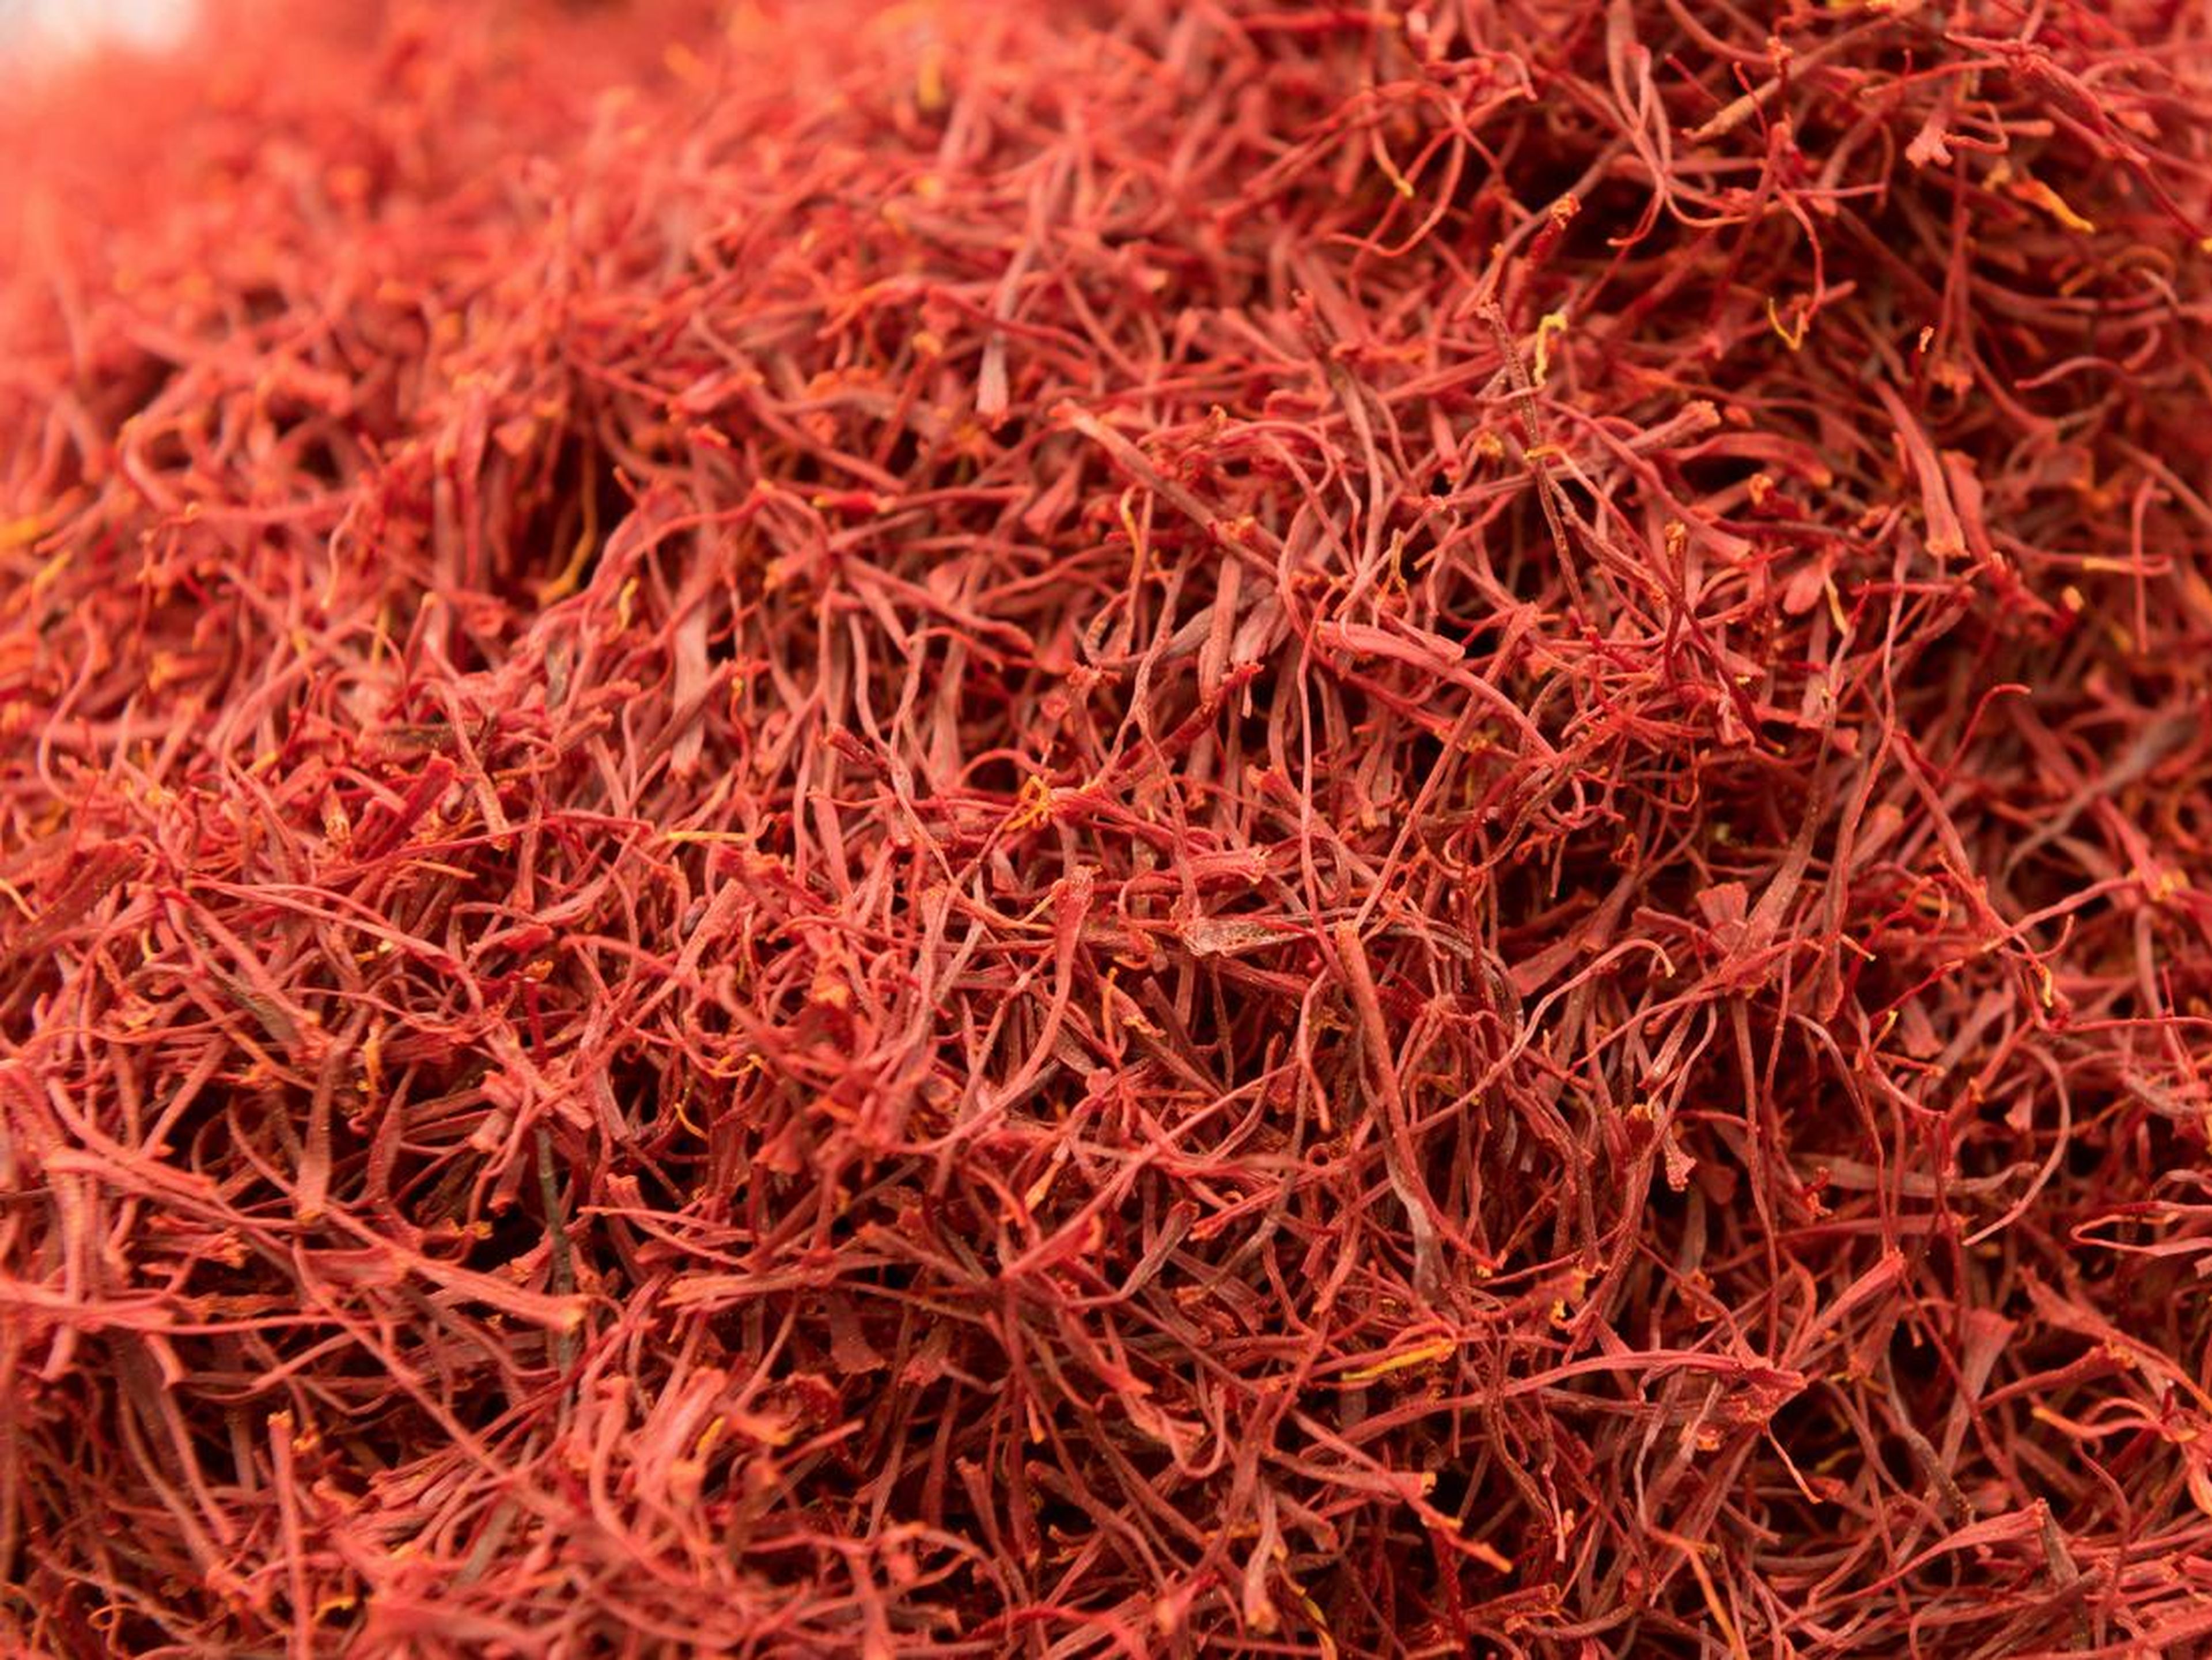 Saffron isn't just rare because of its high price, but because of its counterfeit history.